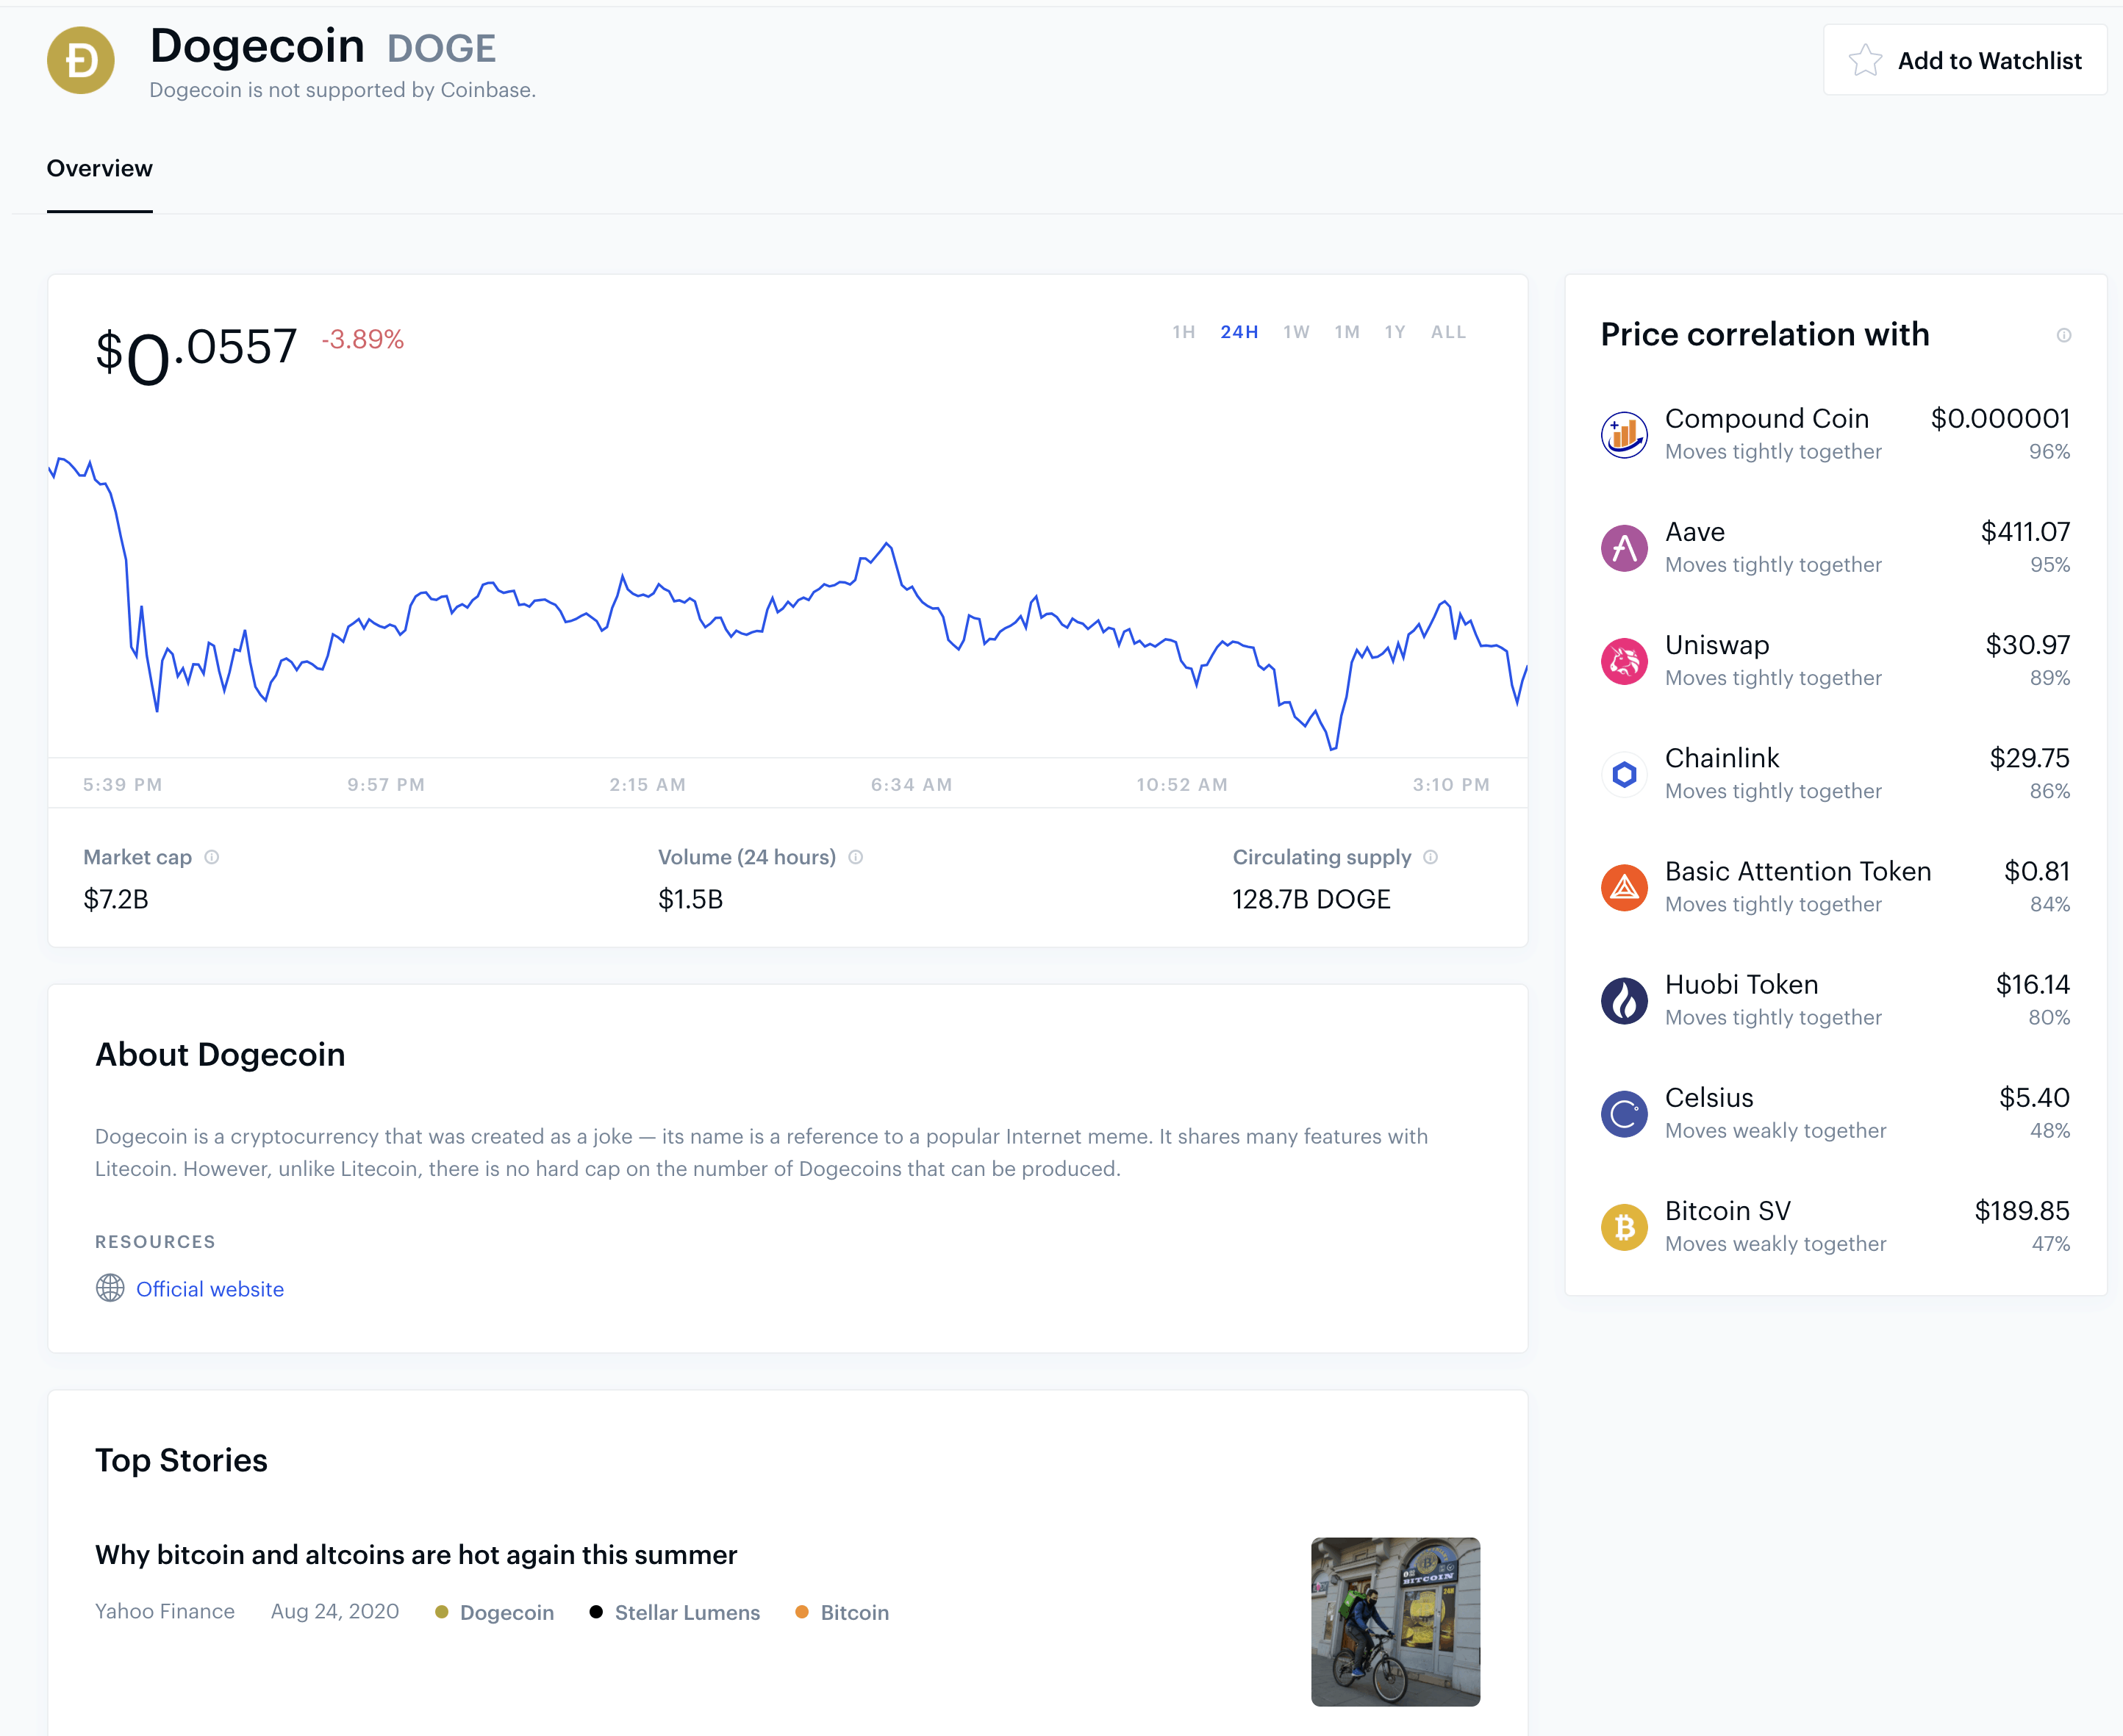 Dogecoin's page on Coinbase Exchange